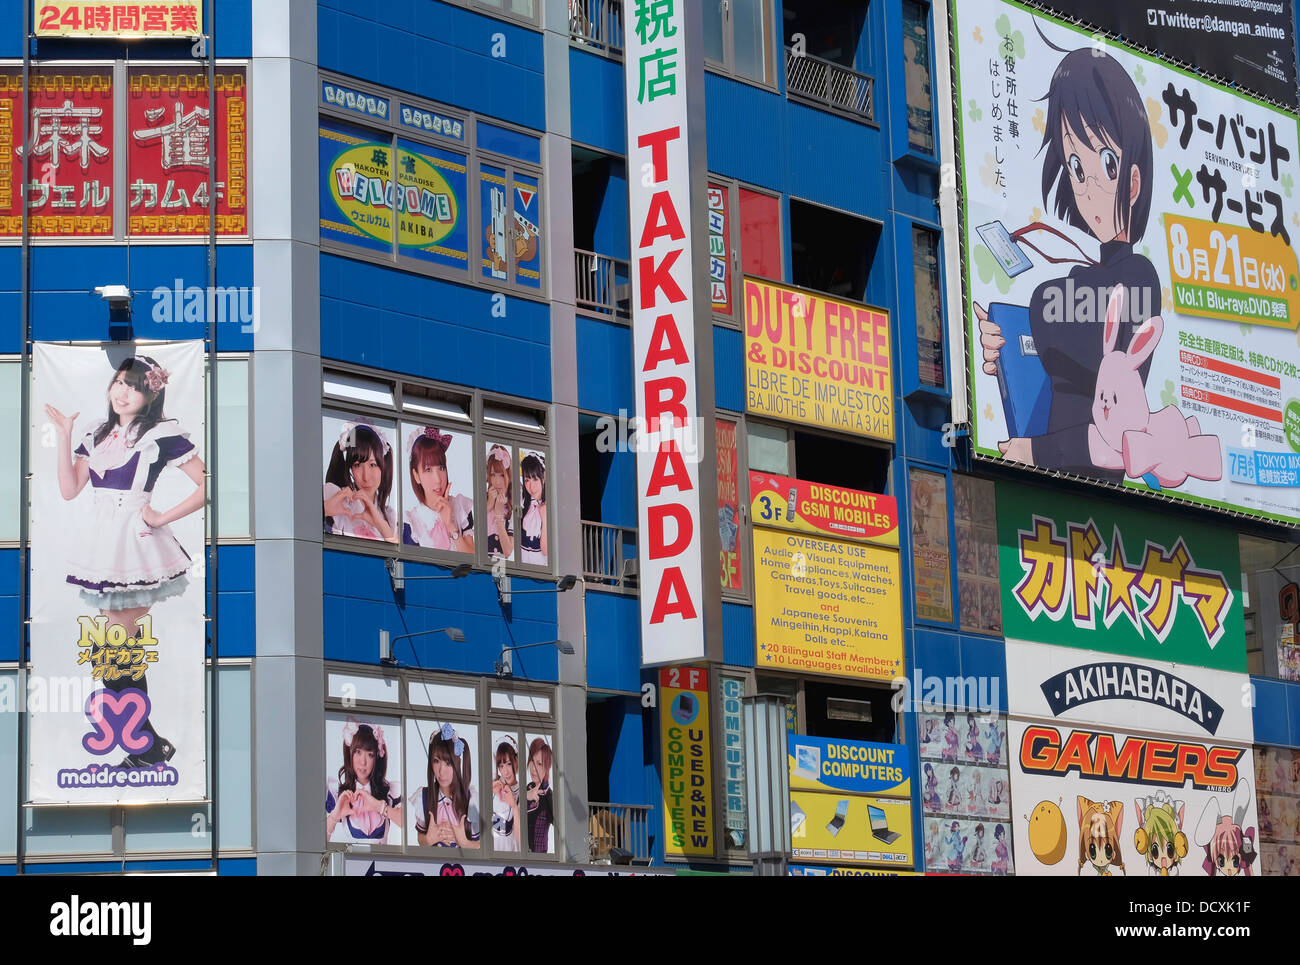 Maid cafe and anime signs in Akihabara Stock Photo